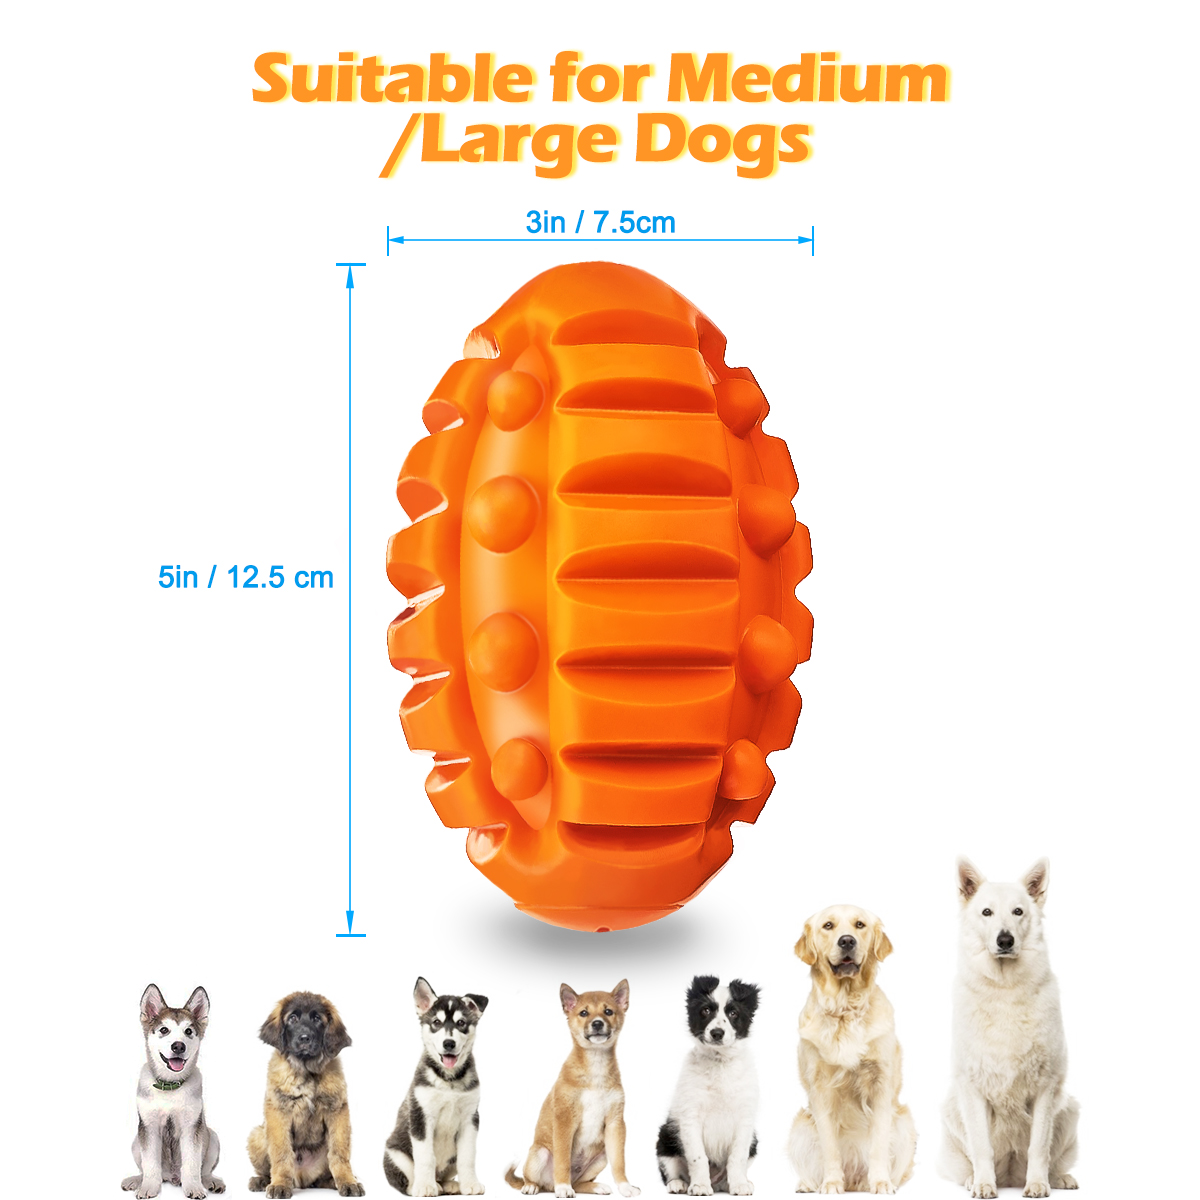 Focuspet-5quotx-3quot-Large-Interactive-Dog-Ball-Toys-Real-Beef-Flavor-Squeaky-Chew-Toy-for-Medium-L-1940481-4